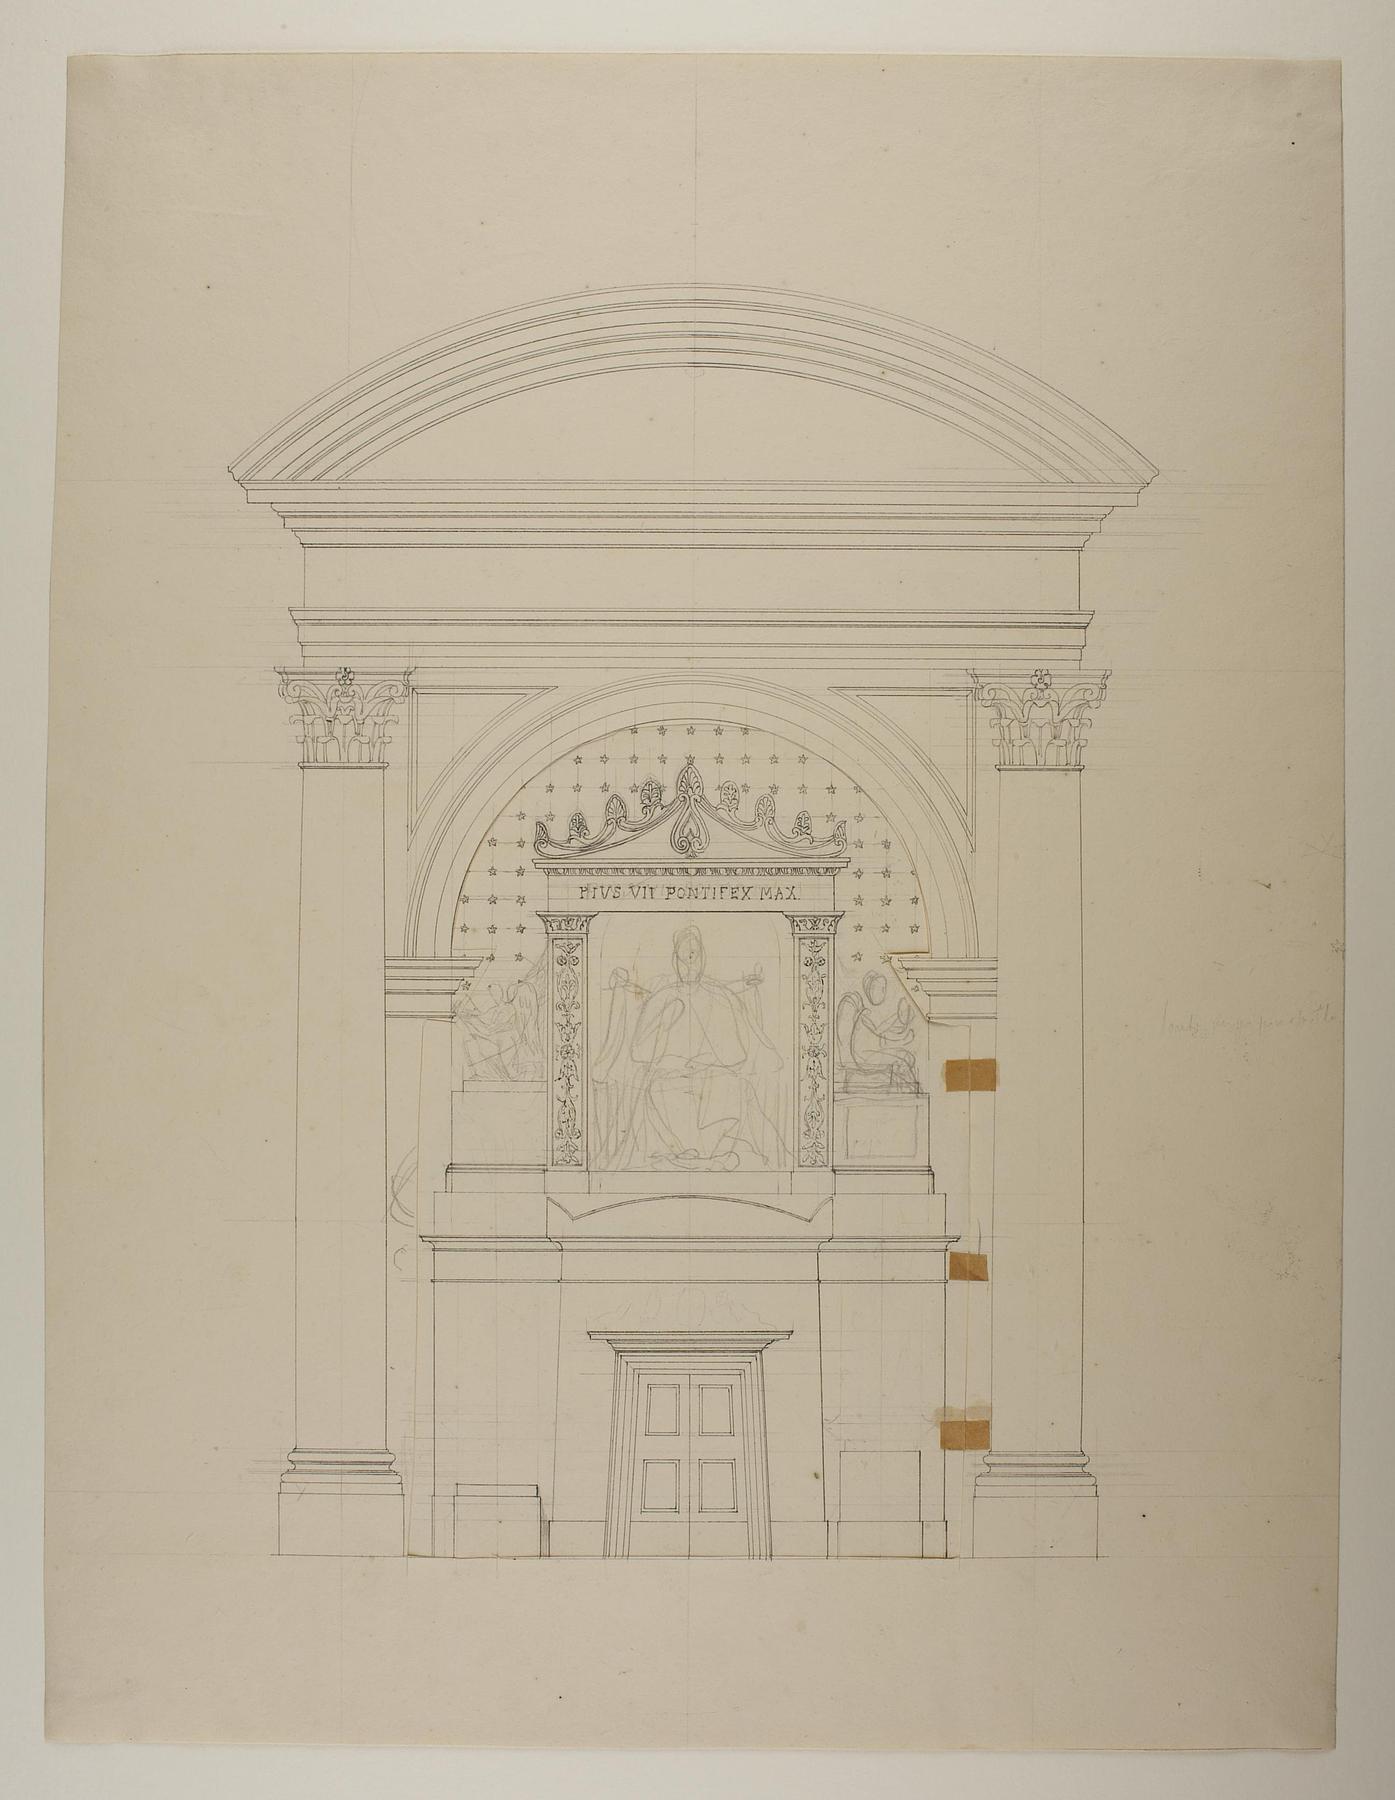 Monument to Pius VII sketched into the niche elevation, C309r